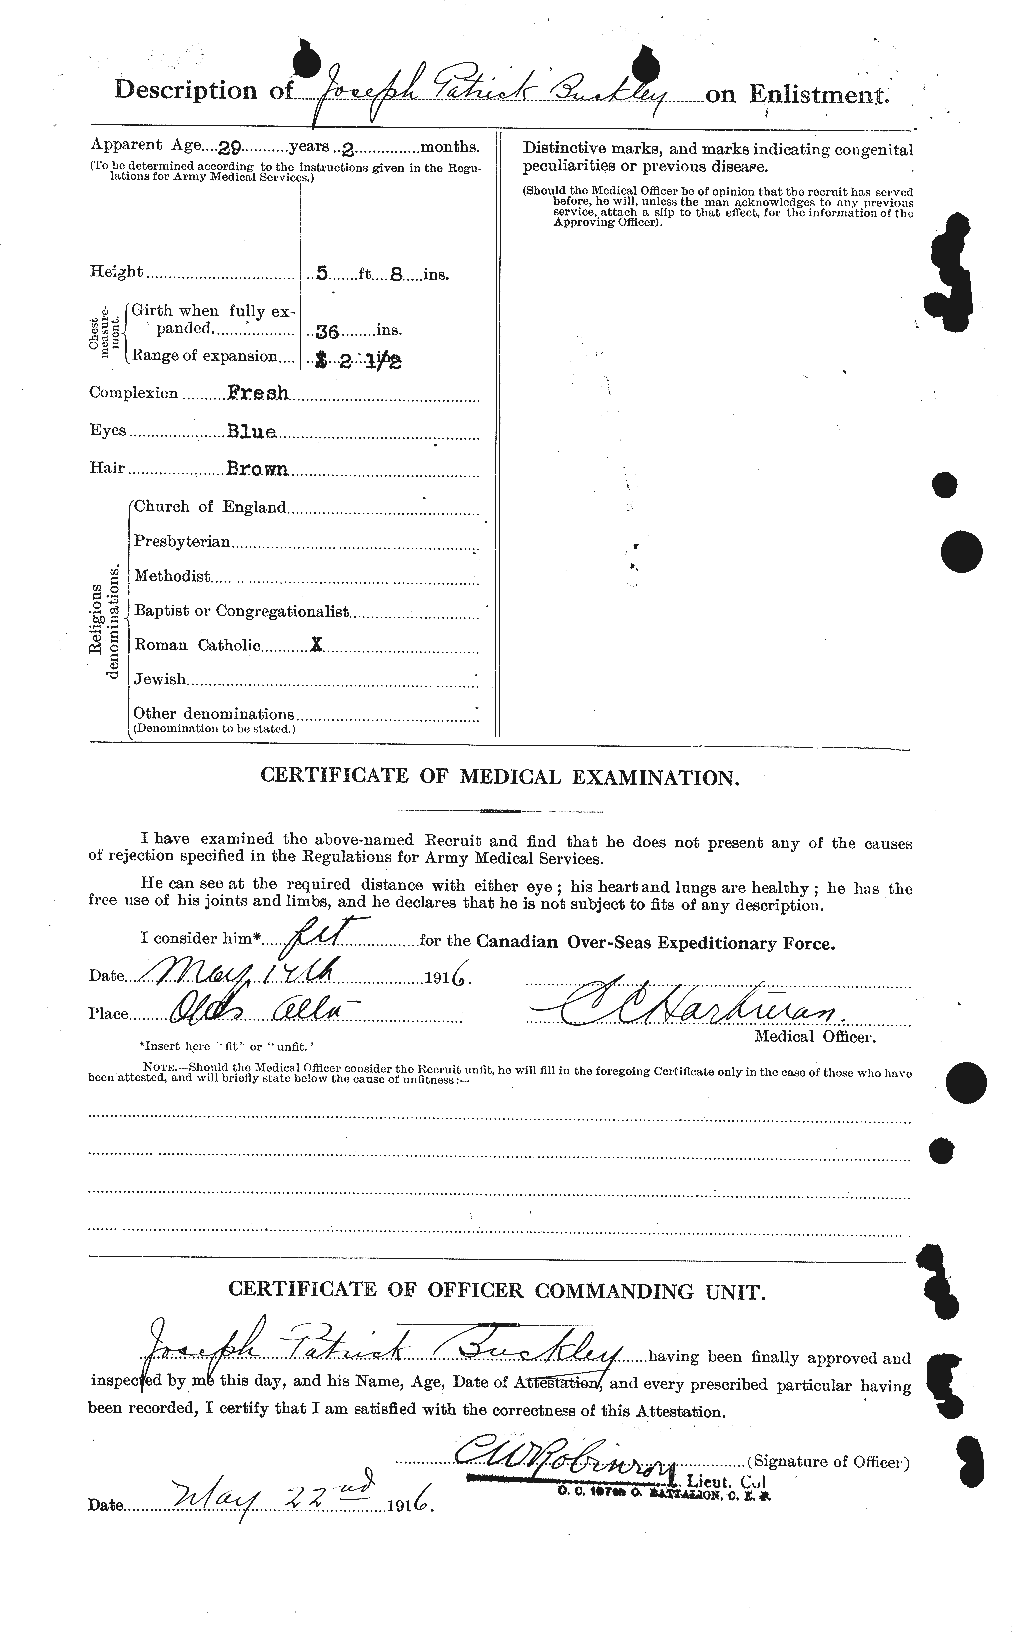 Personnel Records of the First World War - CEF 271154b